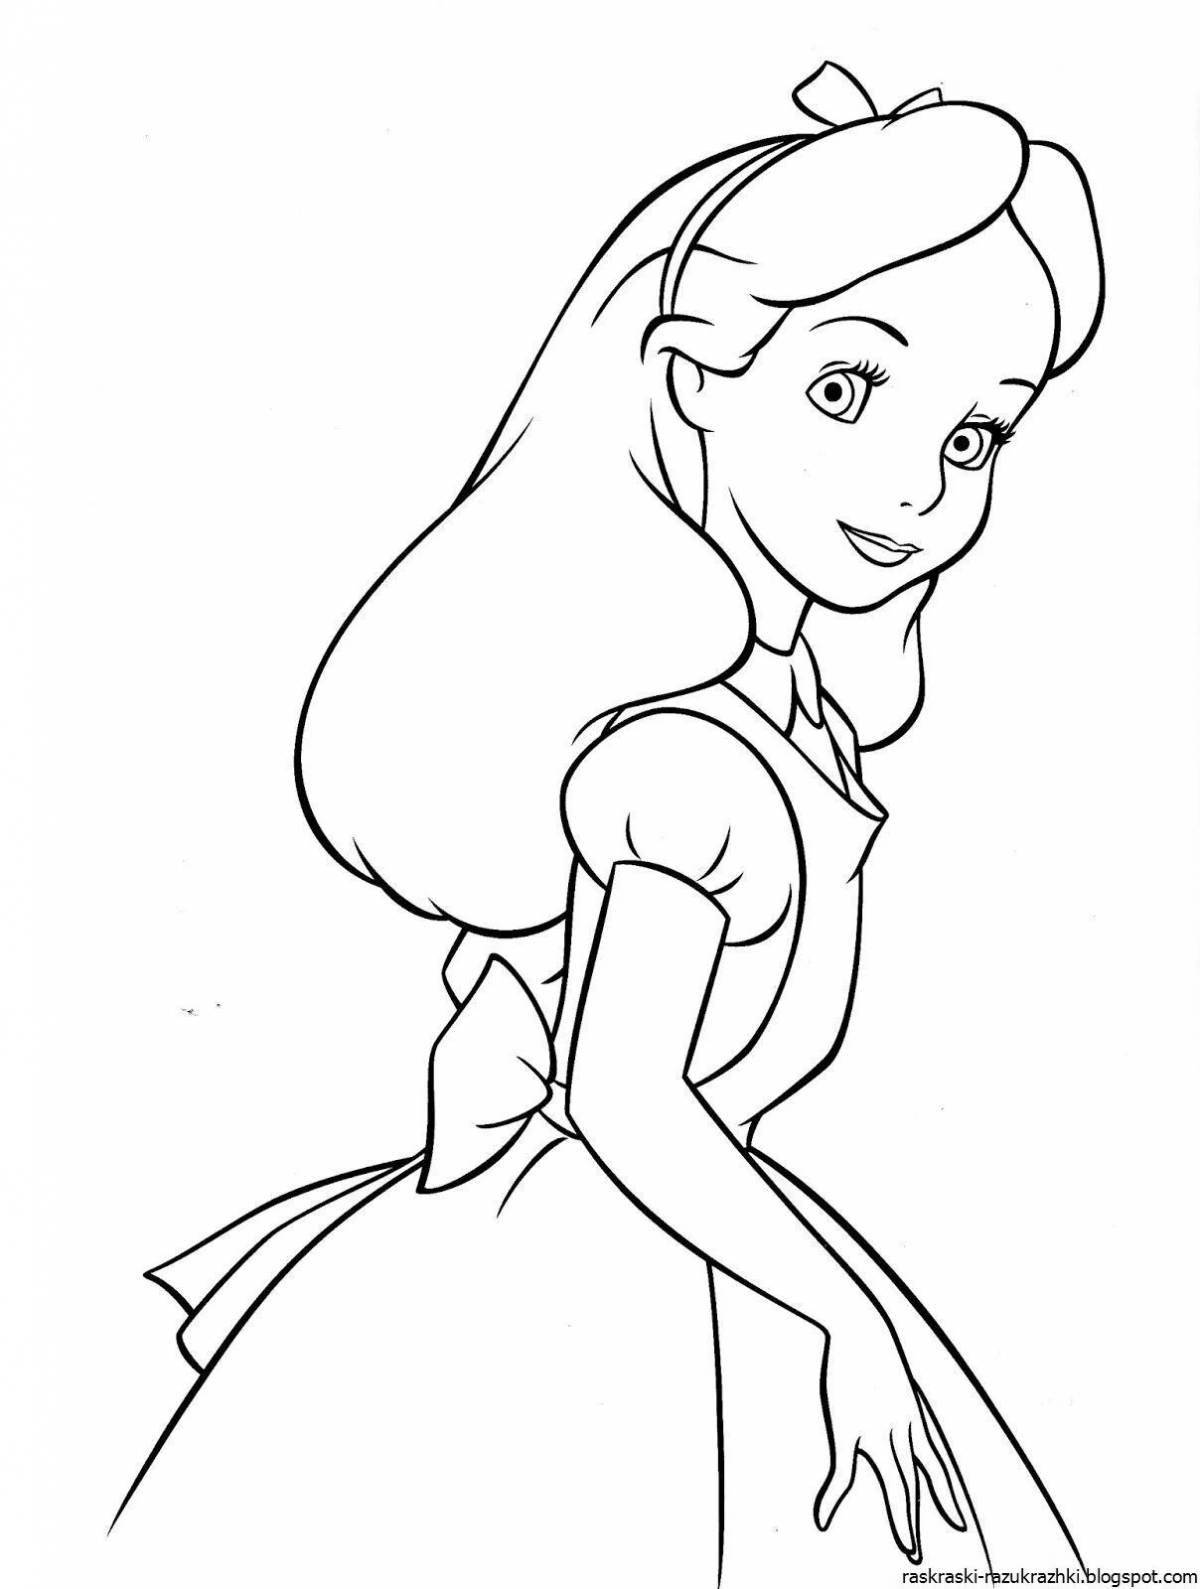 Blessed alice coloring page